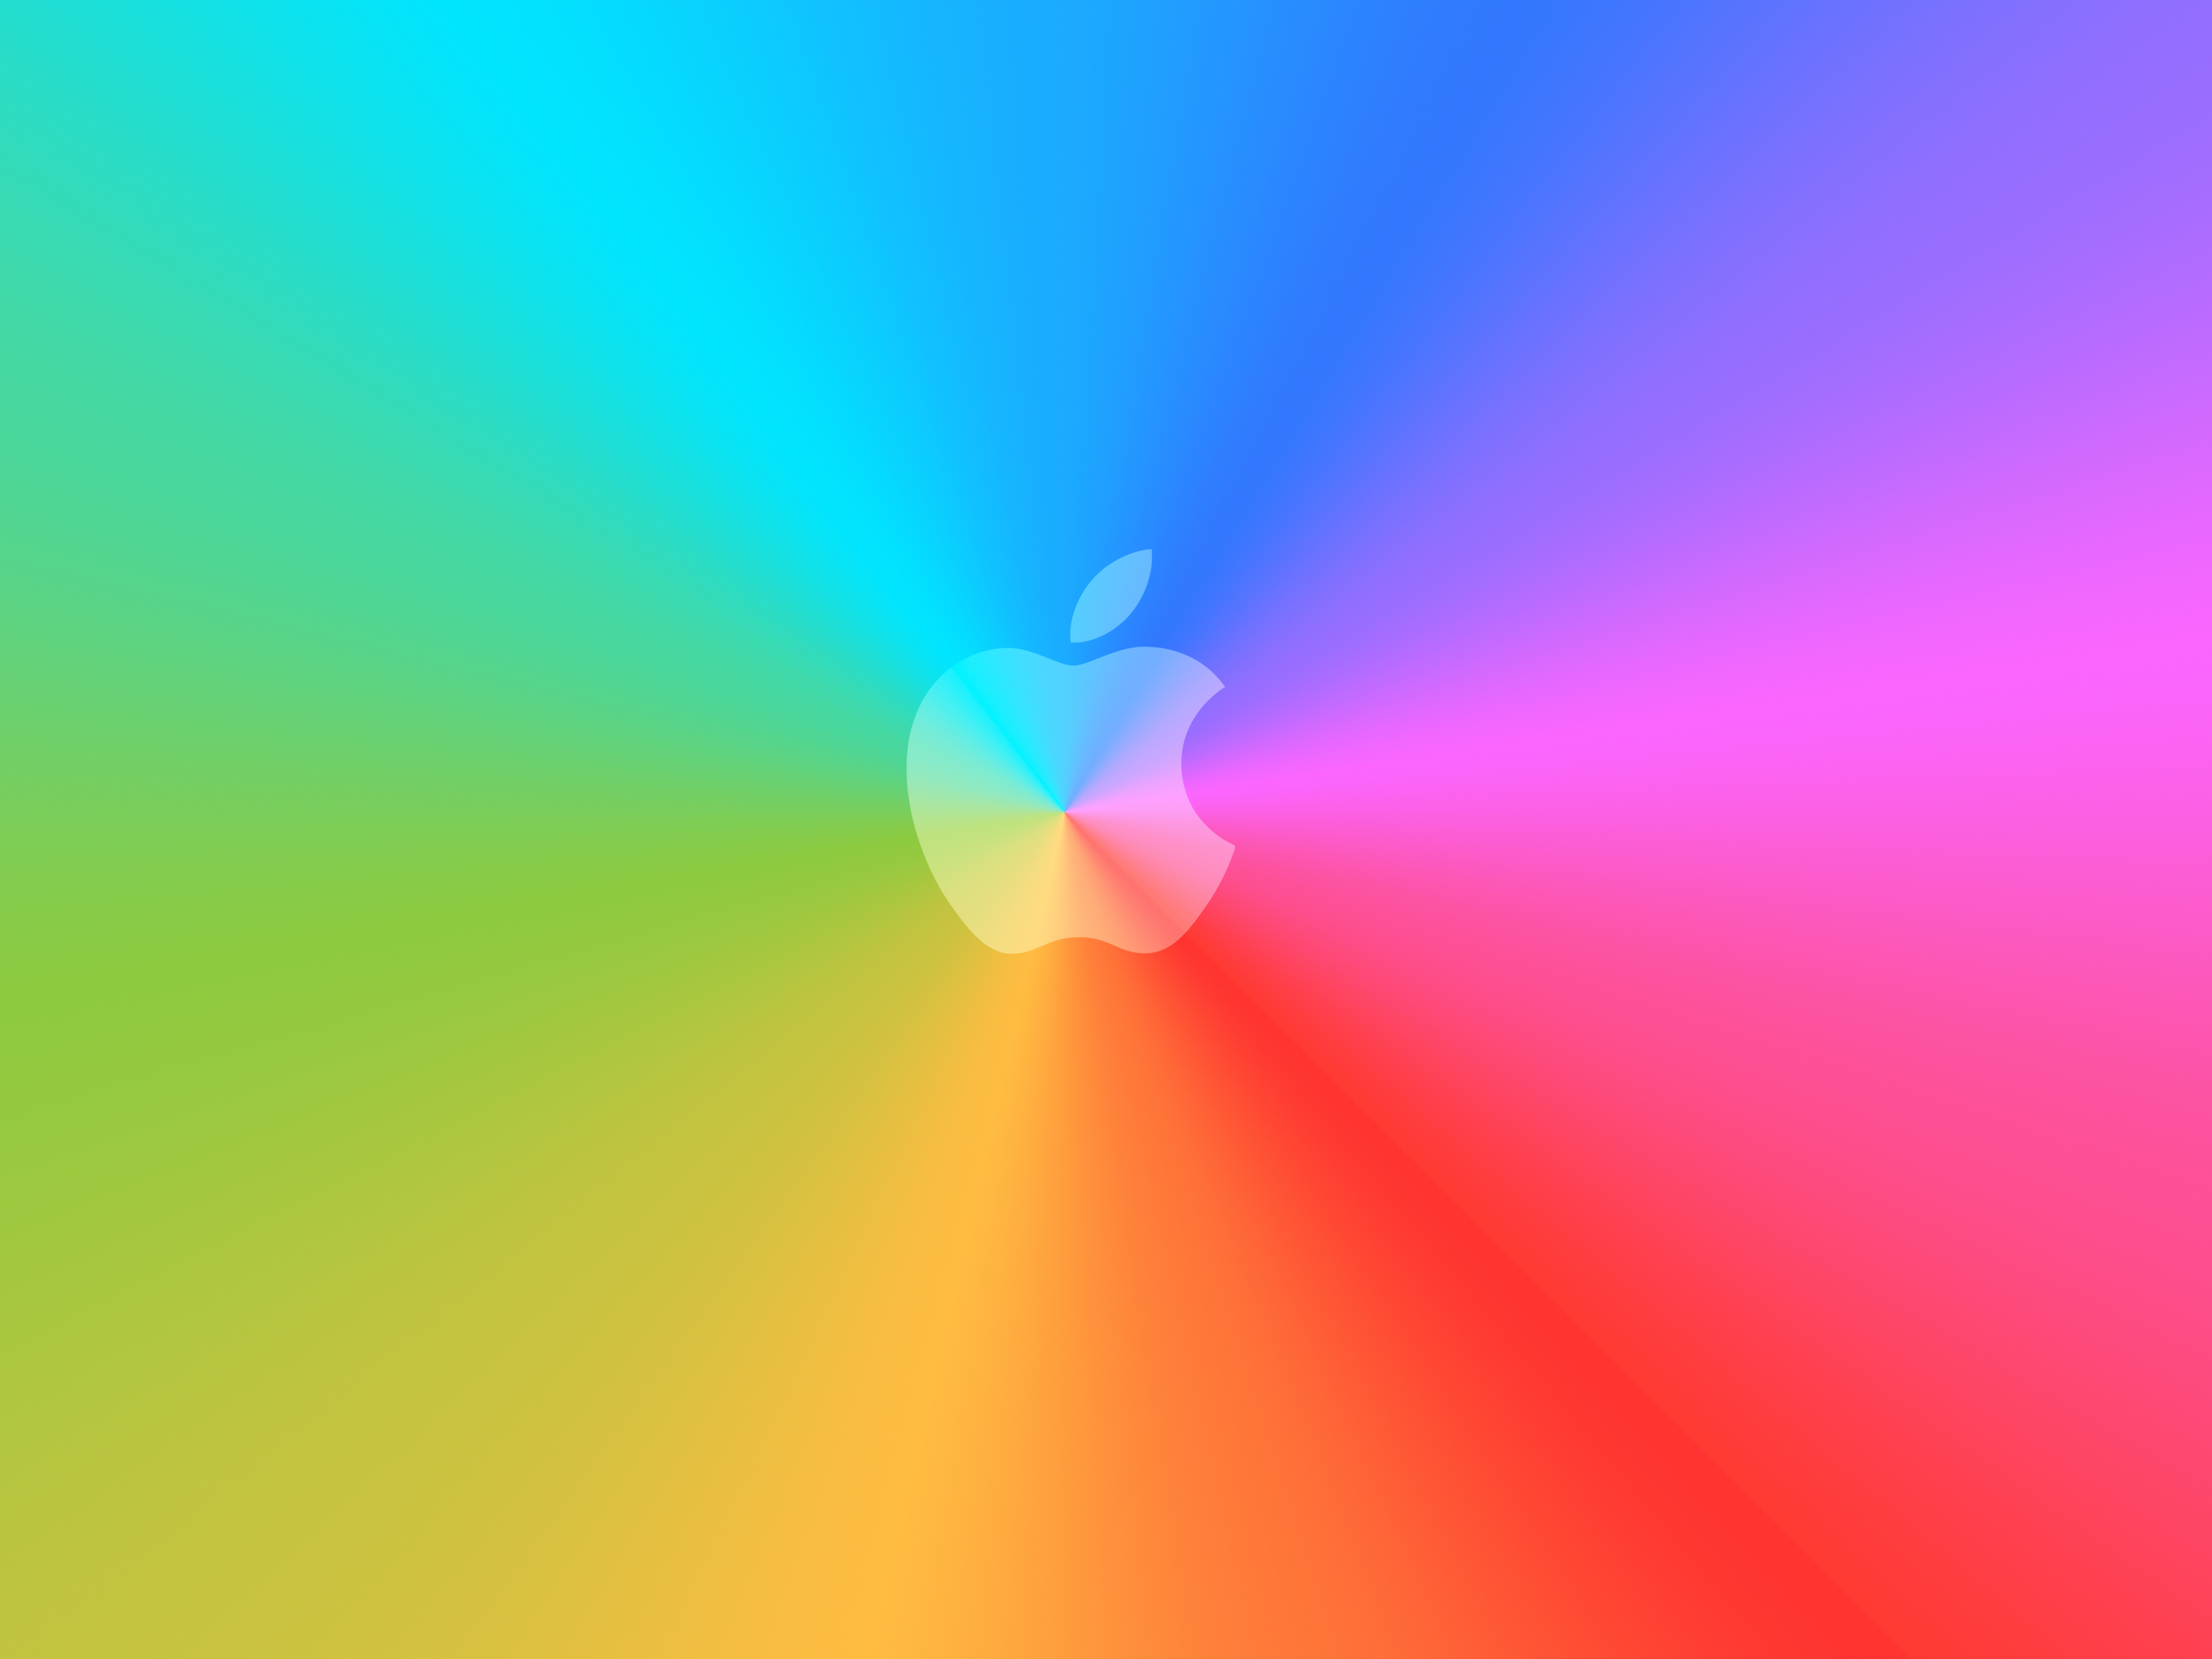 20 Excellent Apple Logo Wallpapers | OSXDaily